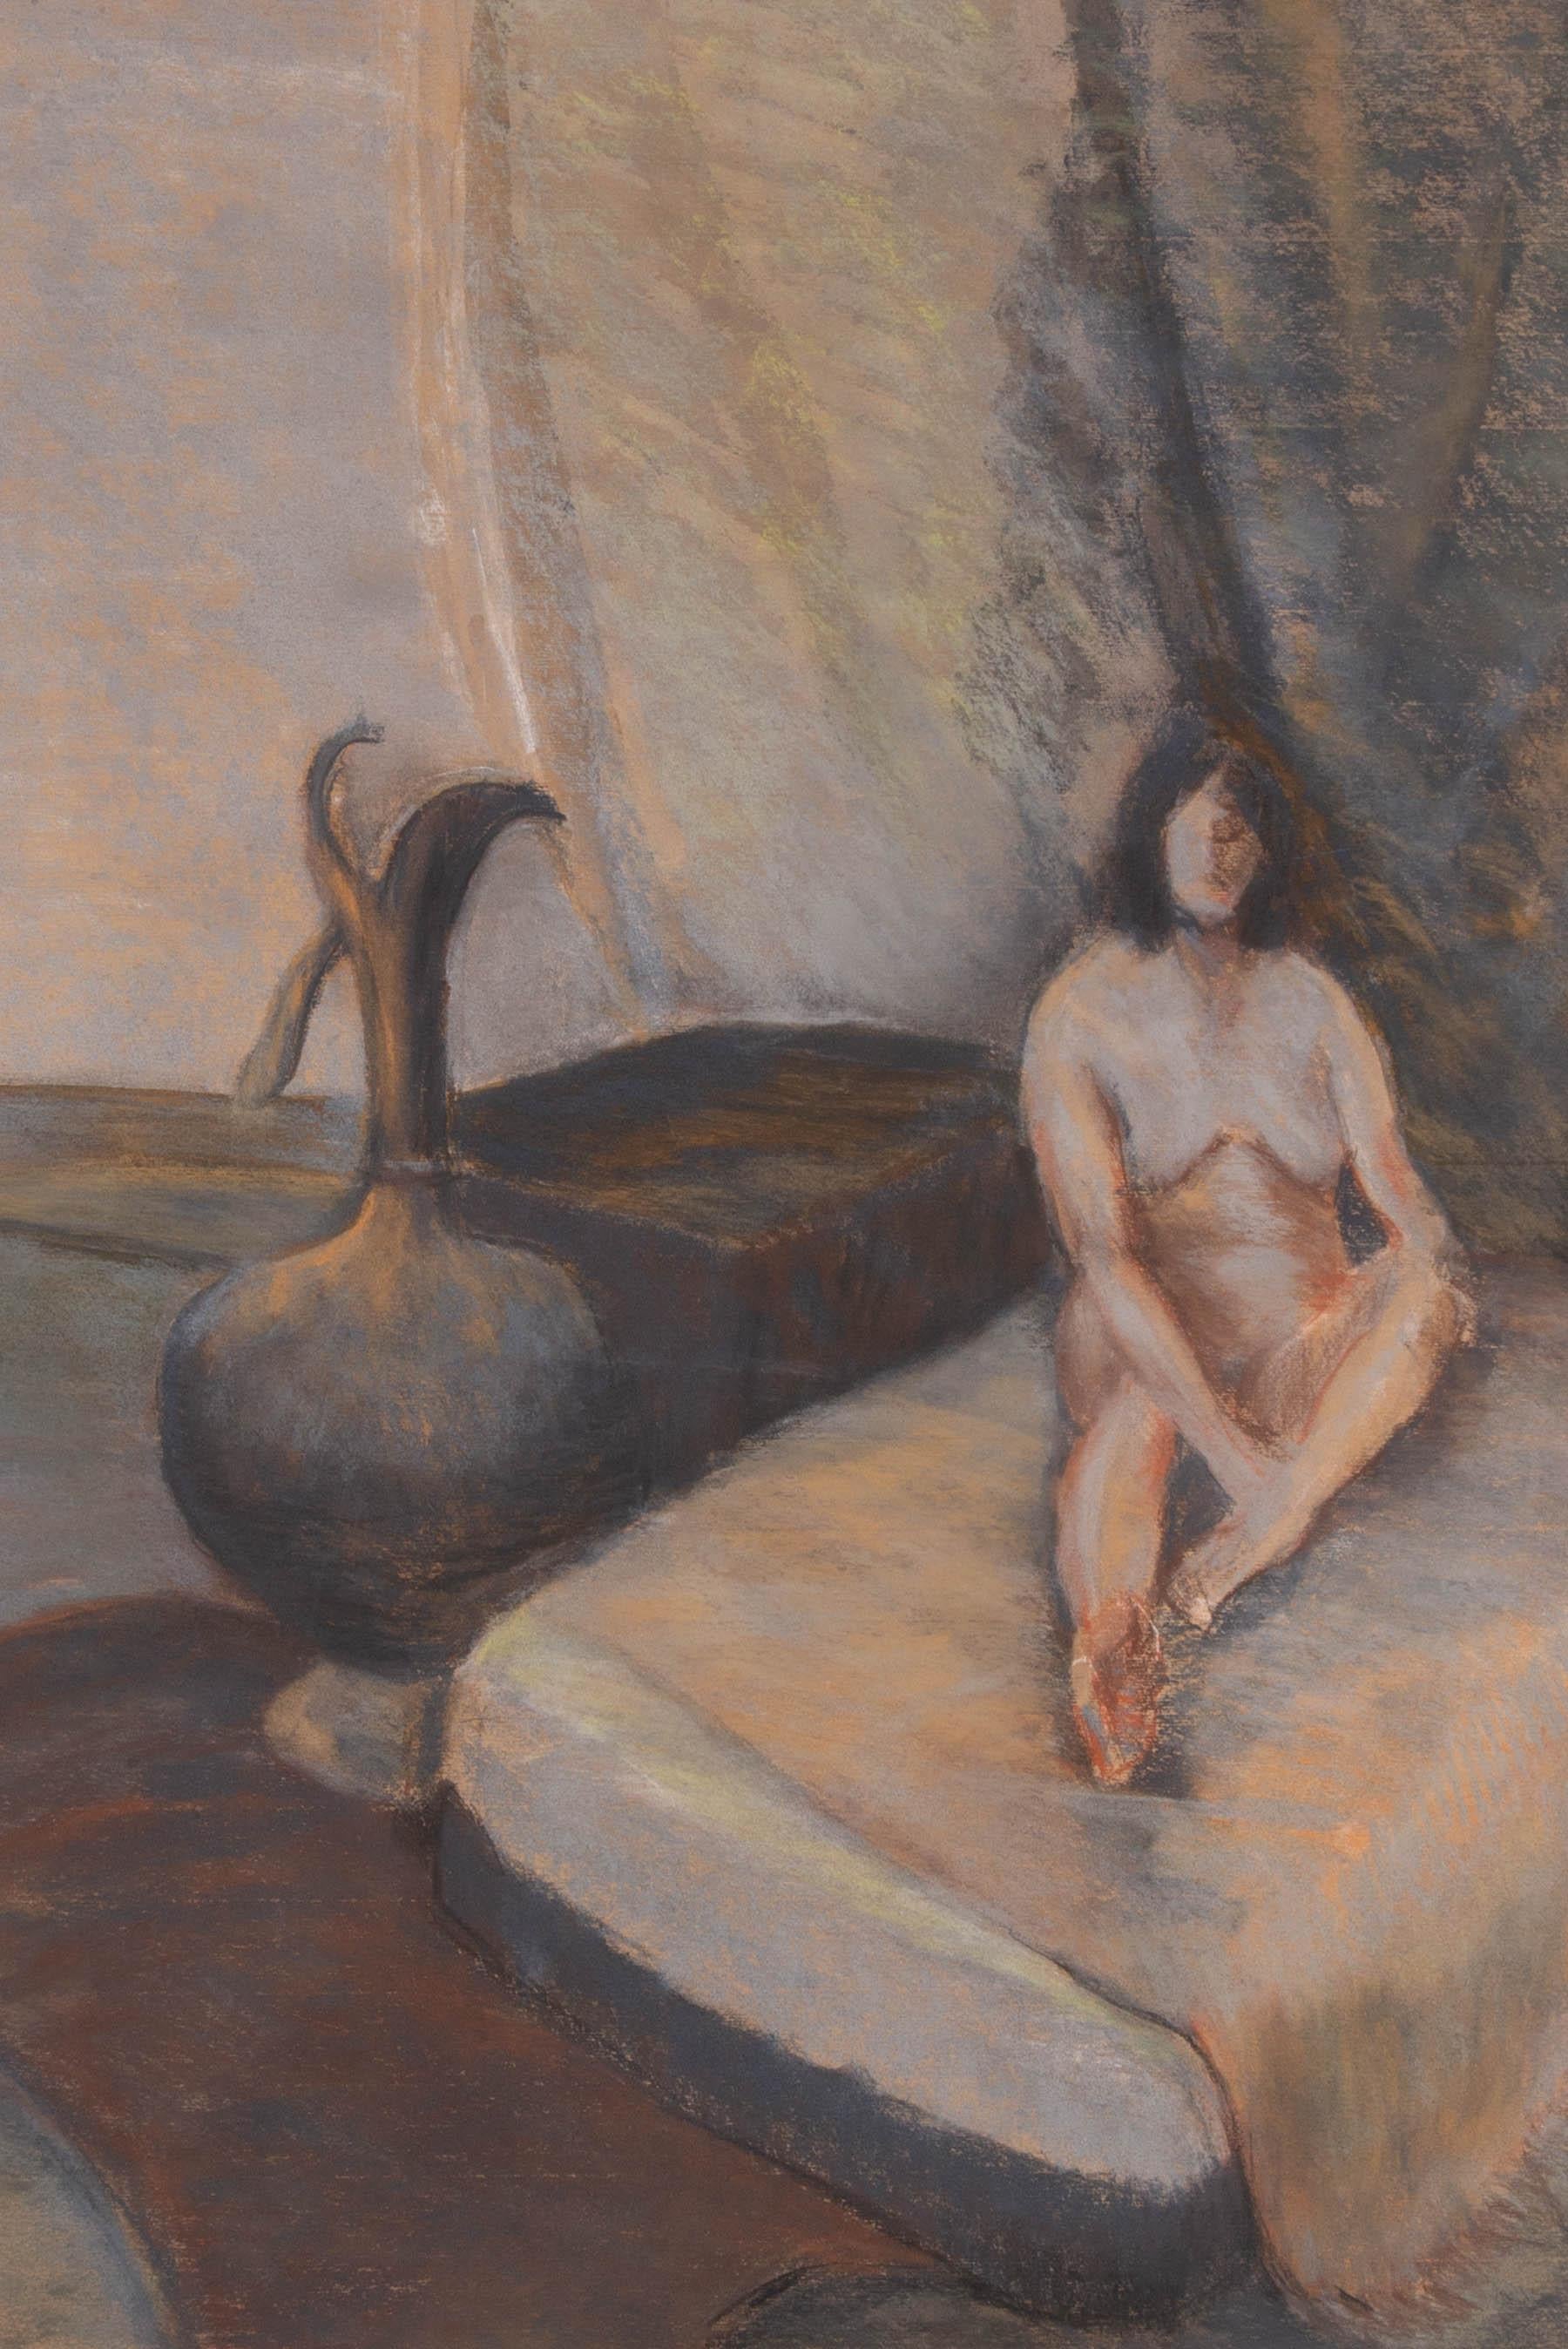 A nude study of a woman sat on a mattress with a humorous distortion of scale, the vase and trunk to the left of the composition matching the size of the woman herself. Unsigned. On laid.







